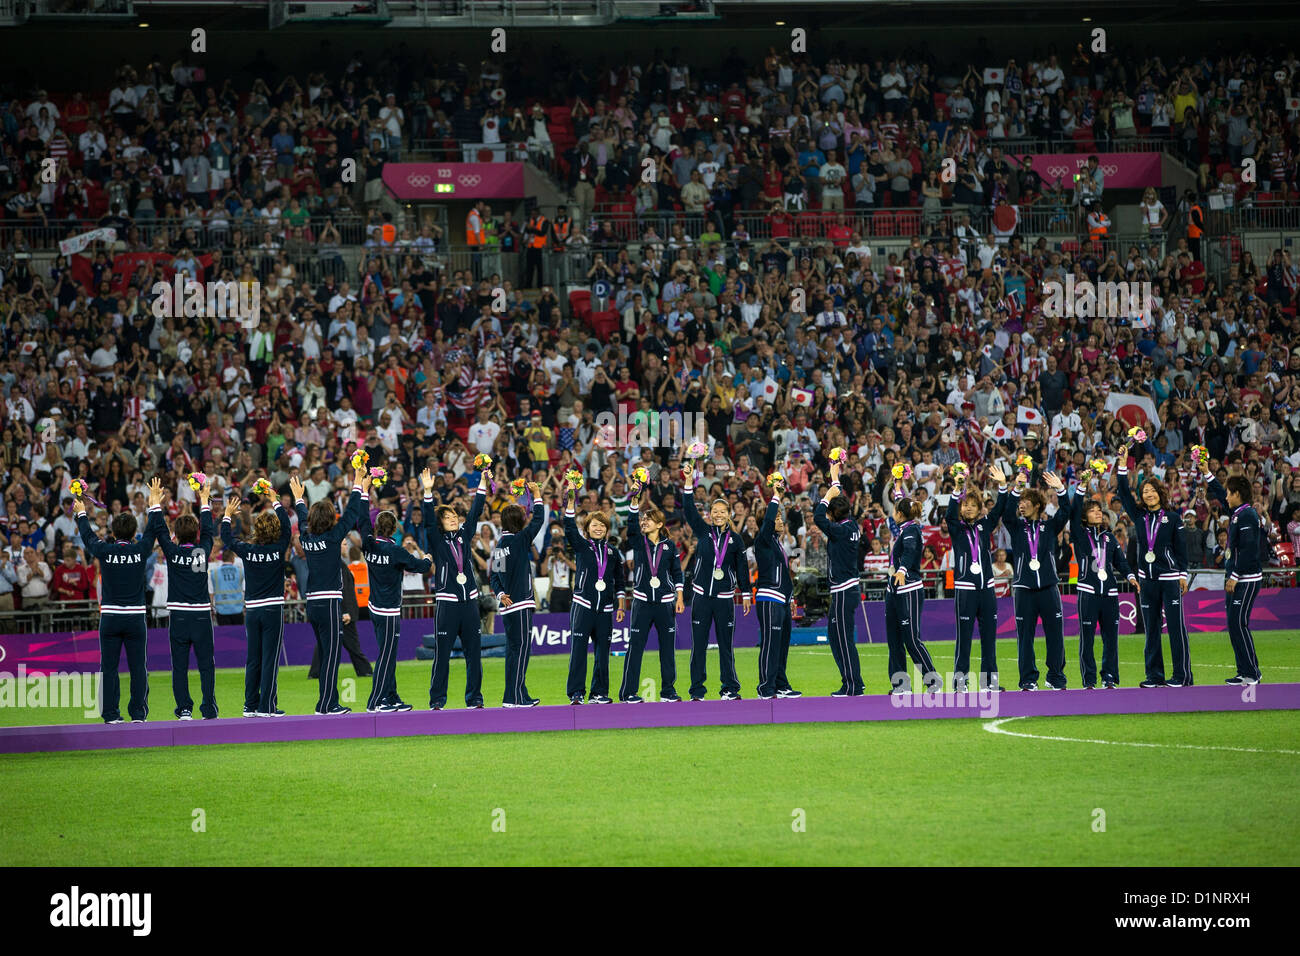 Japan wins silver medal in Women's Football (soccer) at the Olympic Summer Games, London 2012 Stock Photo